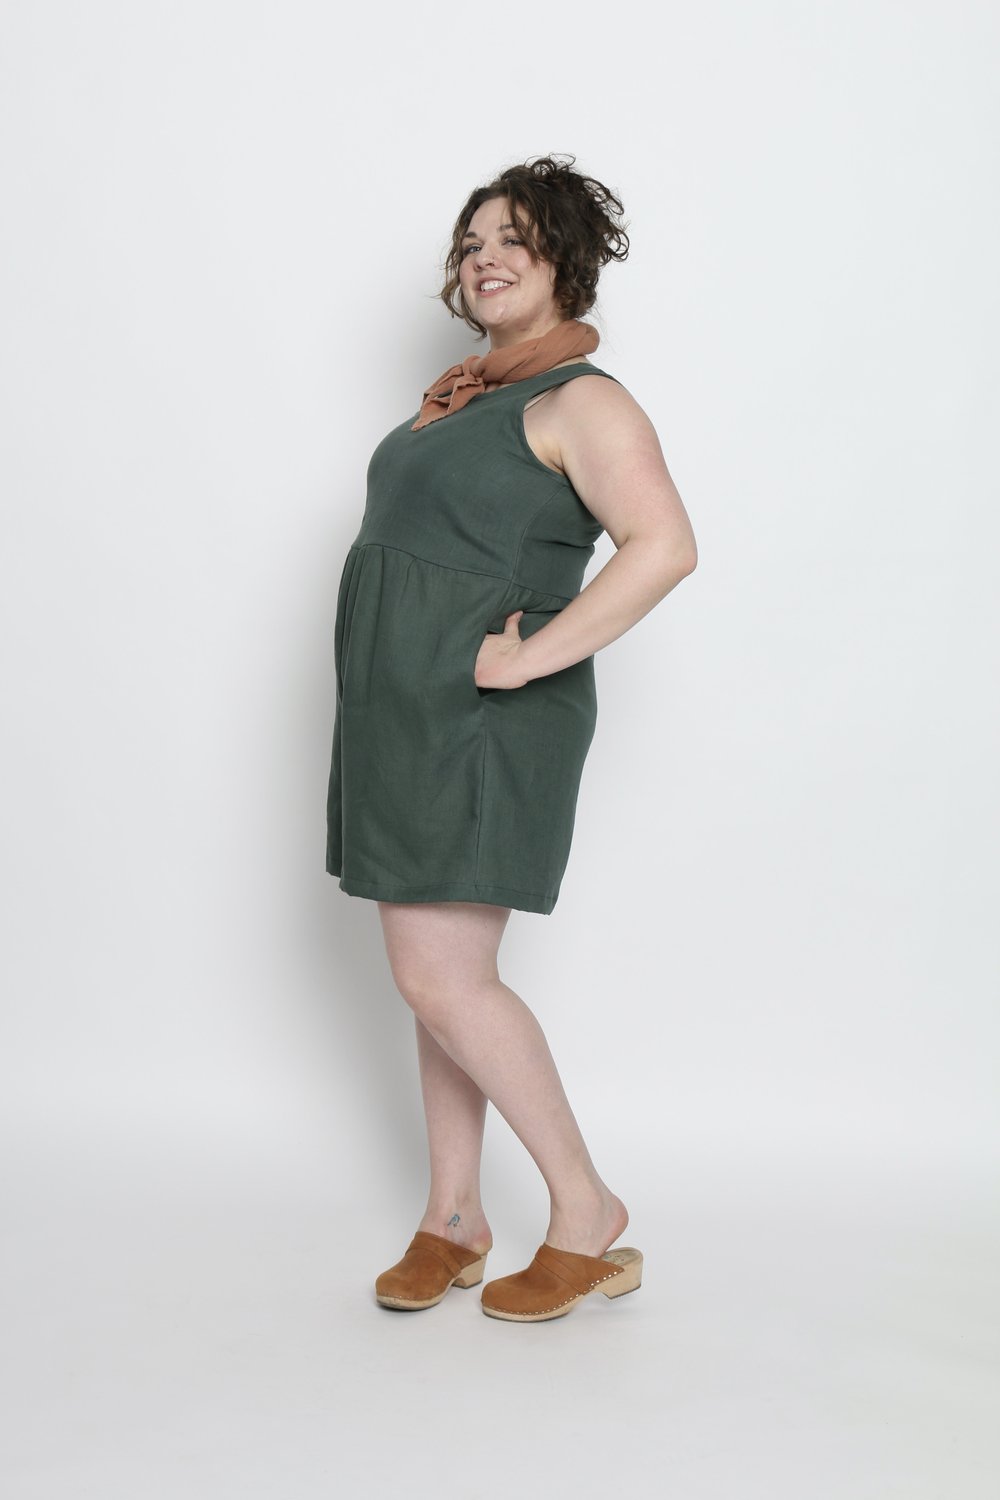 Amber is wearing a size M. Amber&#39;s measurements are: Height 5&#39;7&quot; | Bust 49&quot; | Waist 47&quot; | Hip 53&quot;